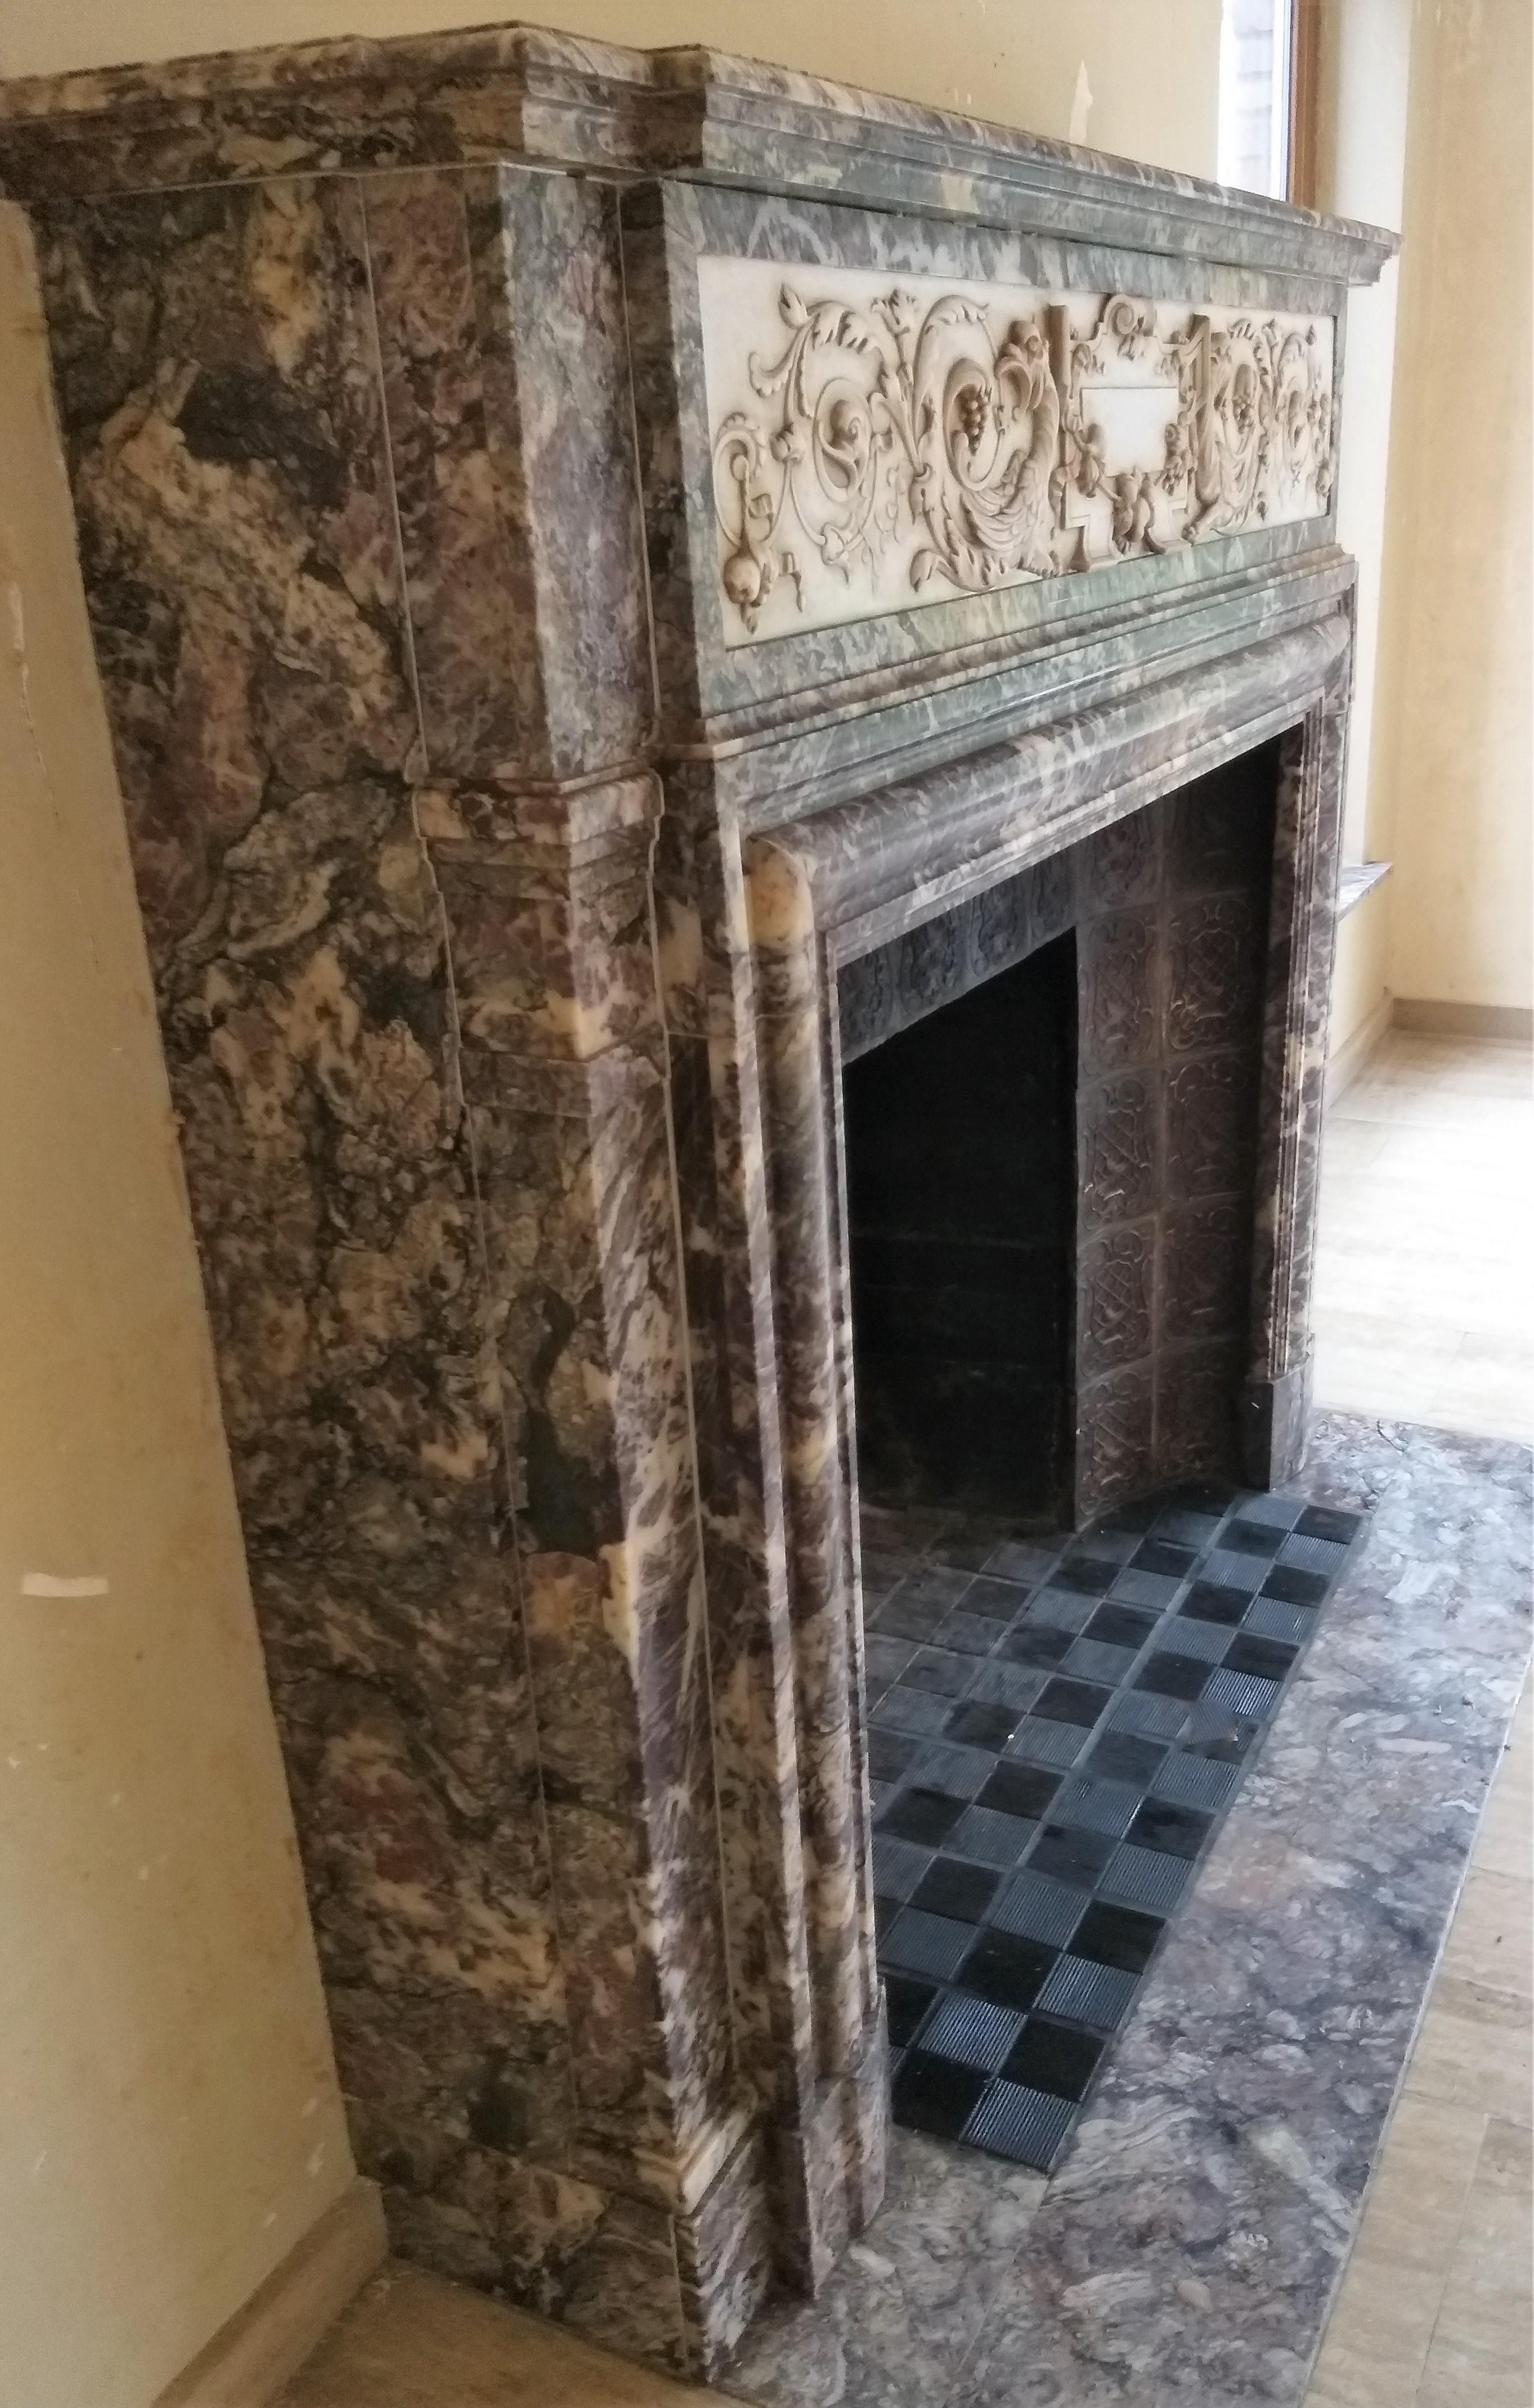 This big and exceptional fireplace was made in the mid of the 19th century of the highly valued Brèche Violet marble and Carrara Statuary marble, thus playins with the colors contrasts. The linteau in Carrara shows a cartouche in the center, flanked